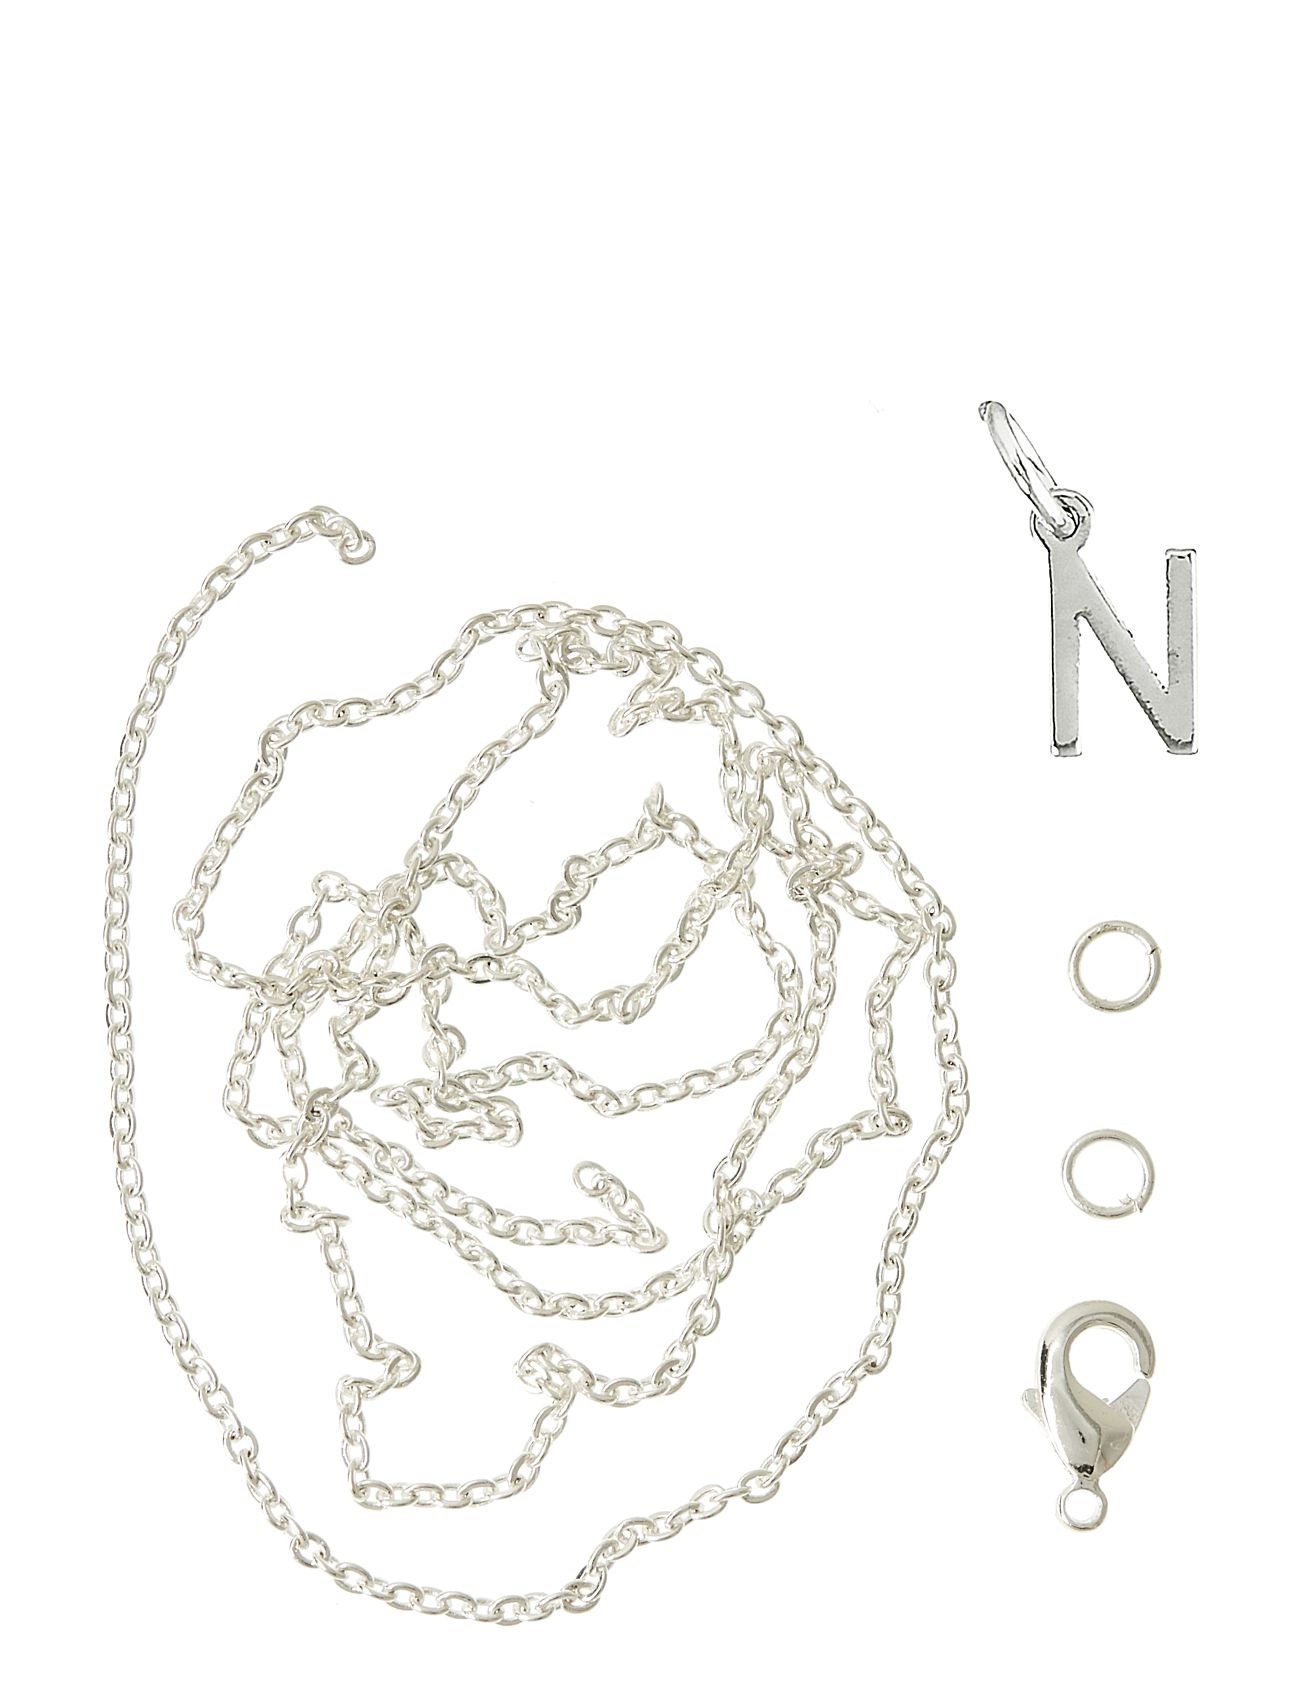 Letter N Sp With O-Ring, Chain And Clasp Toys Creativity Drawing & Crafts Craft Jewellery & Accessories Silver Me & My Box